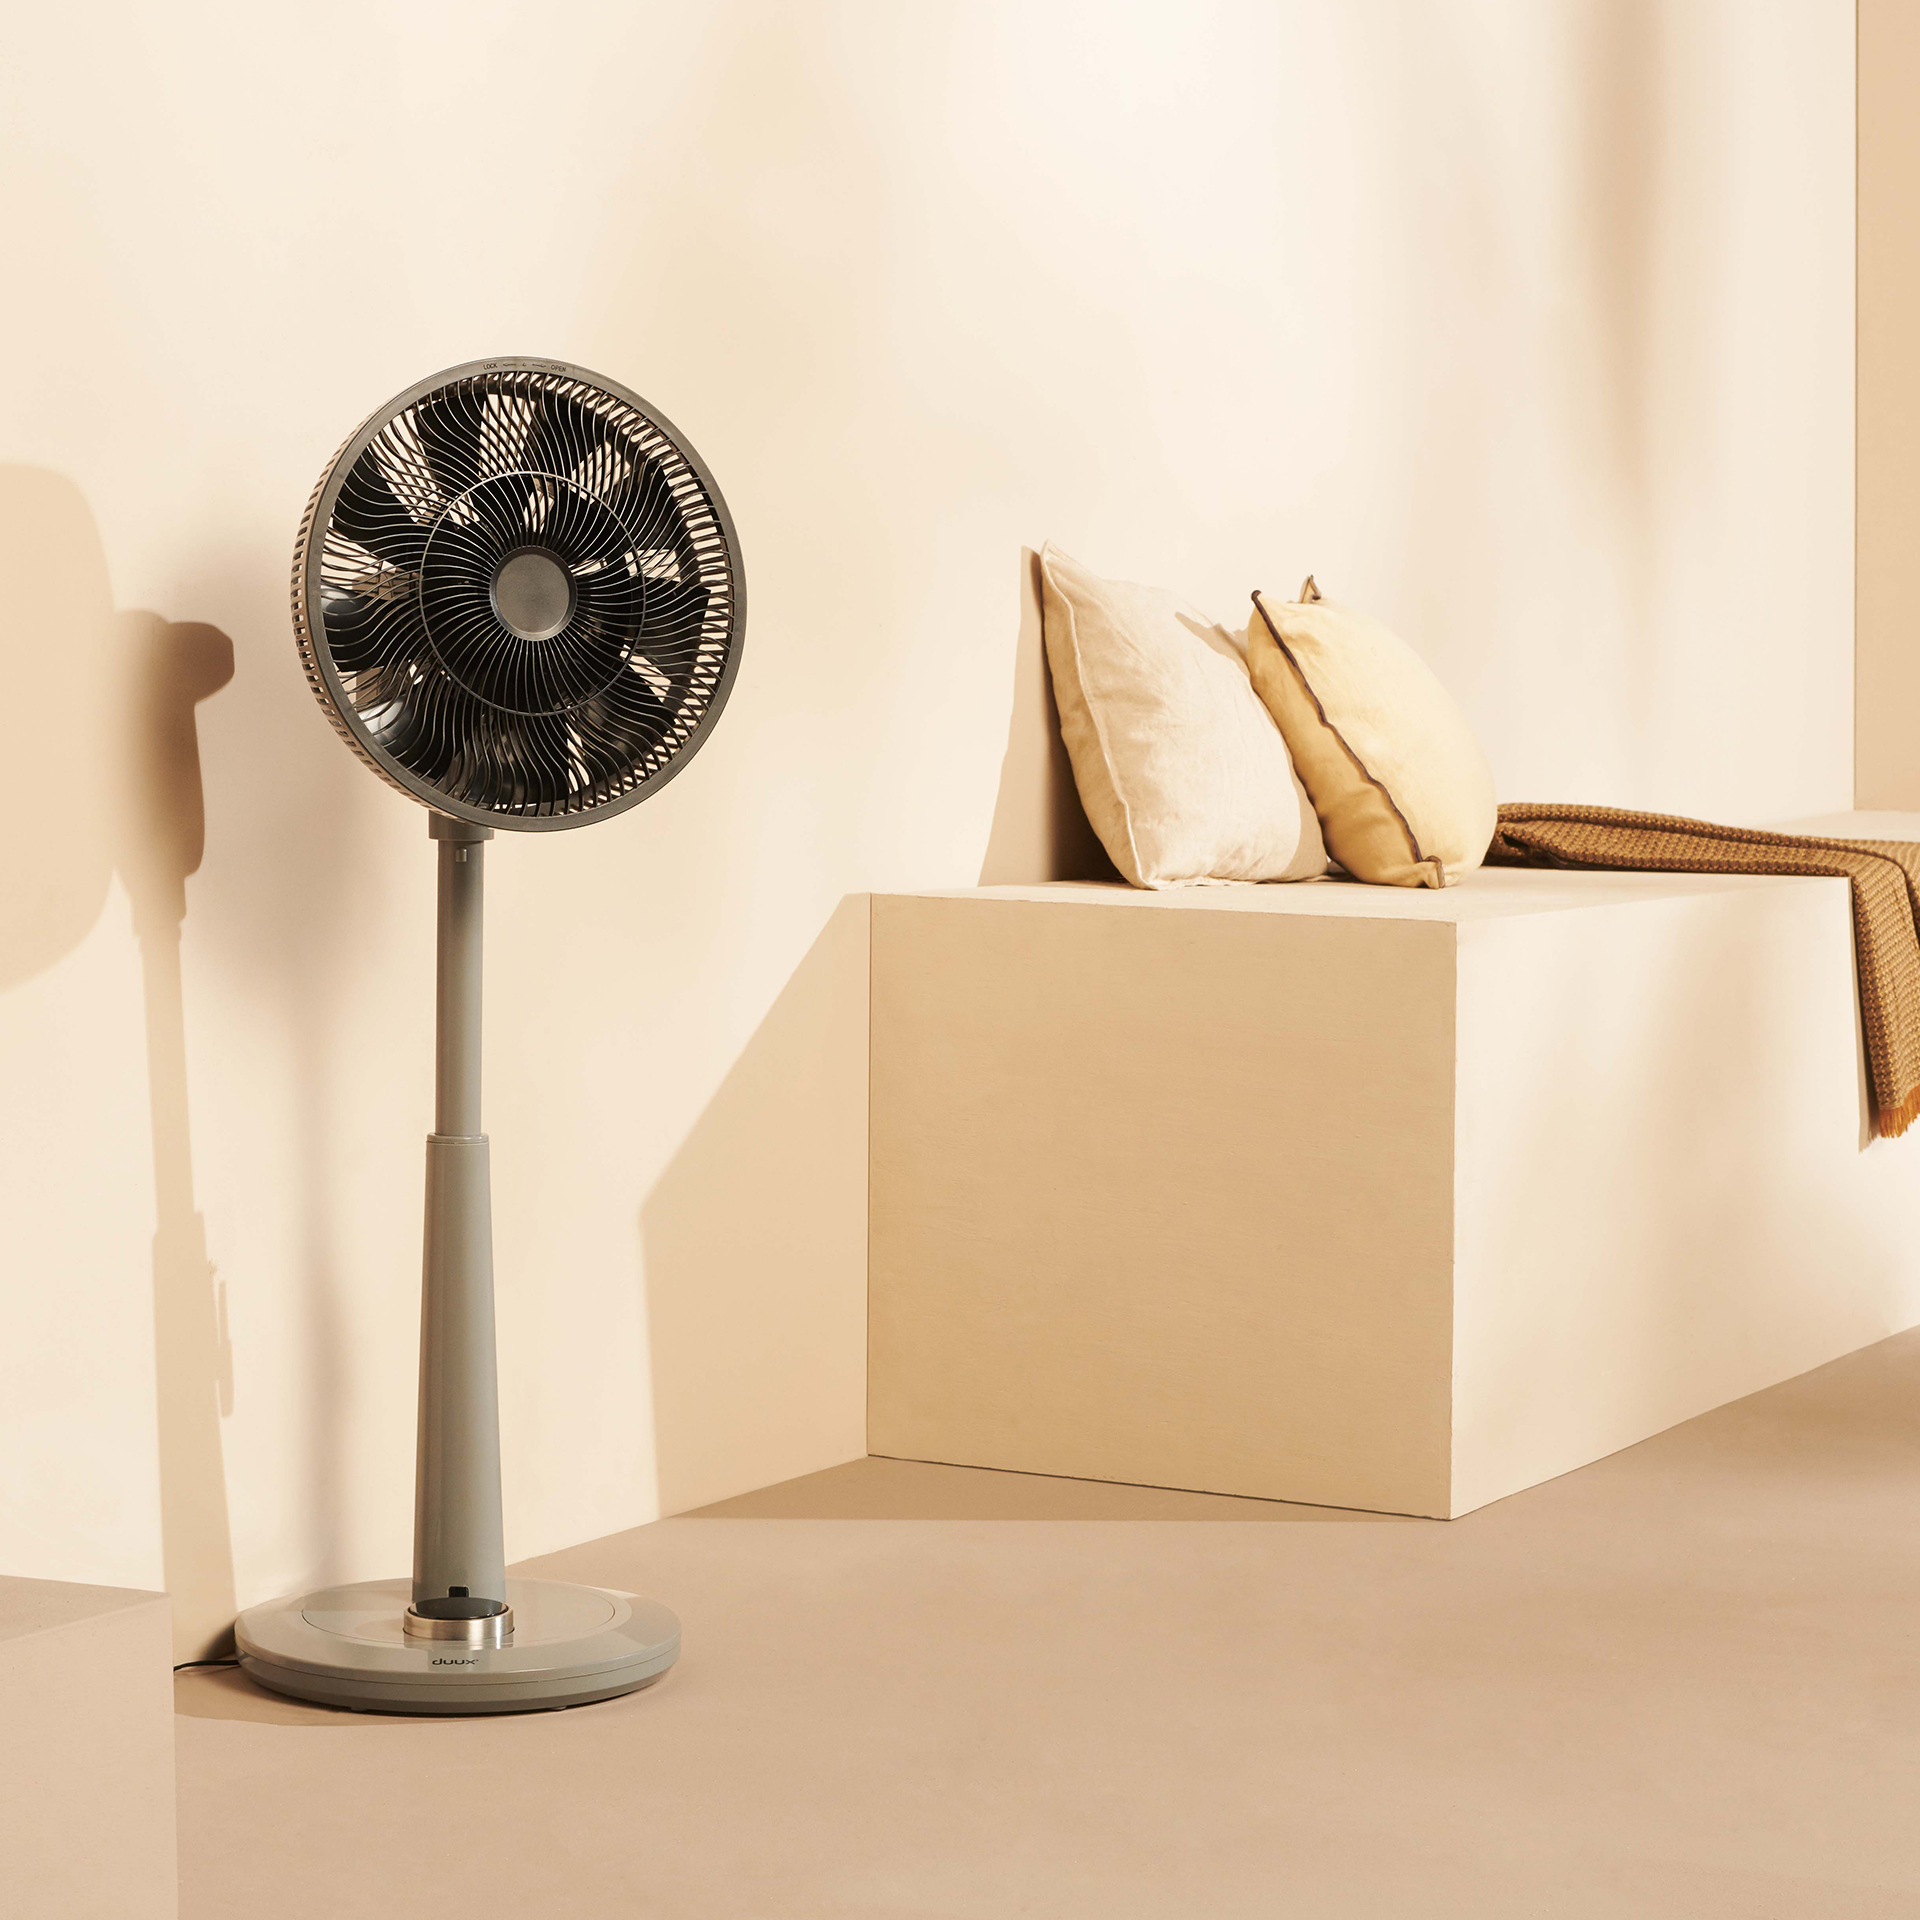 The Whisper Fan from Duux in White operates with a whisper-quiet sound, yet delivers a range of airflow strengths from a gentle breeze to a strong gust of wind.